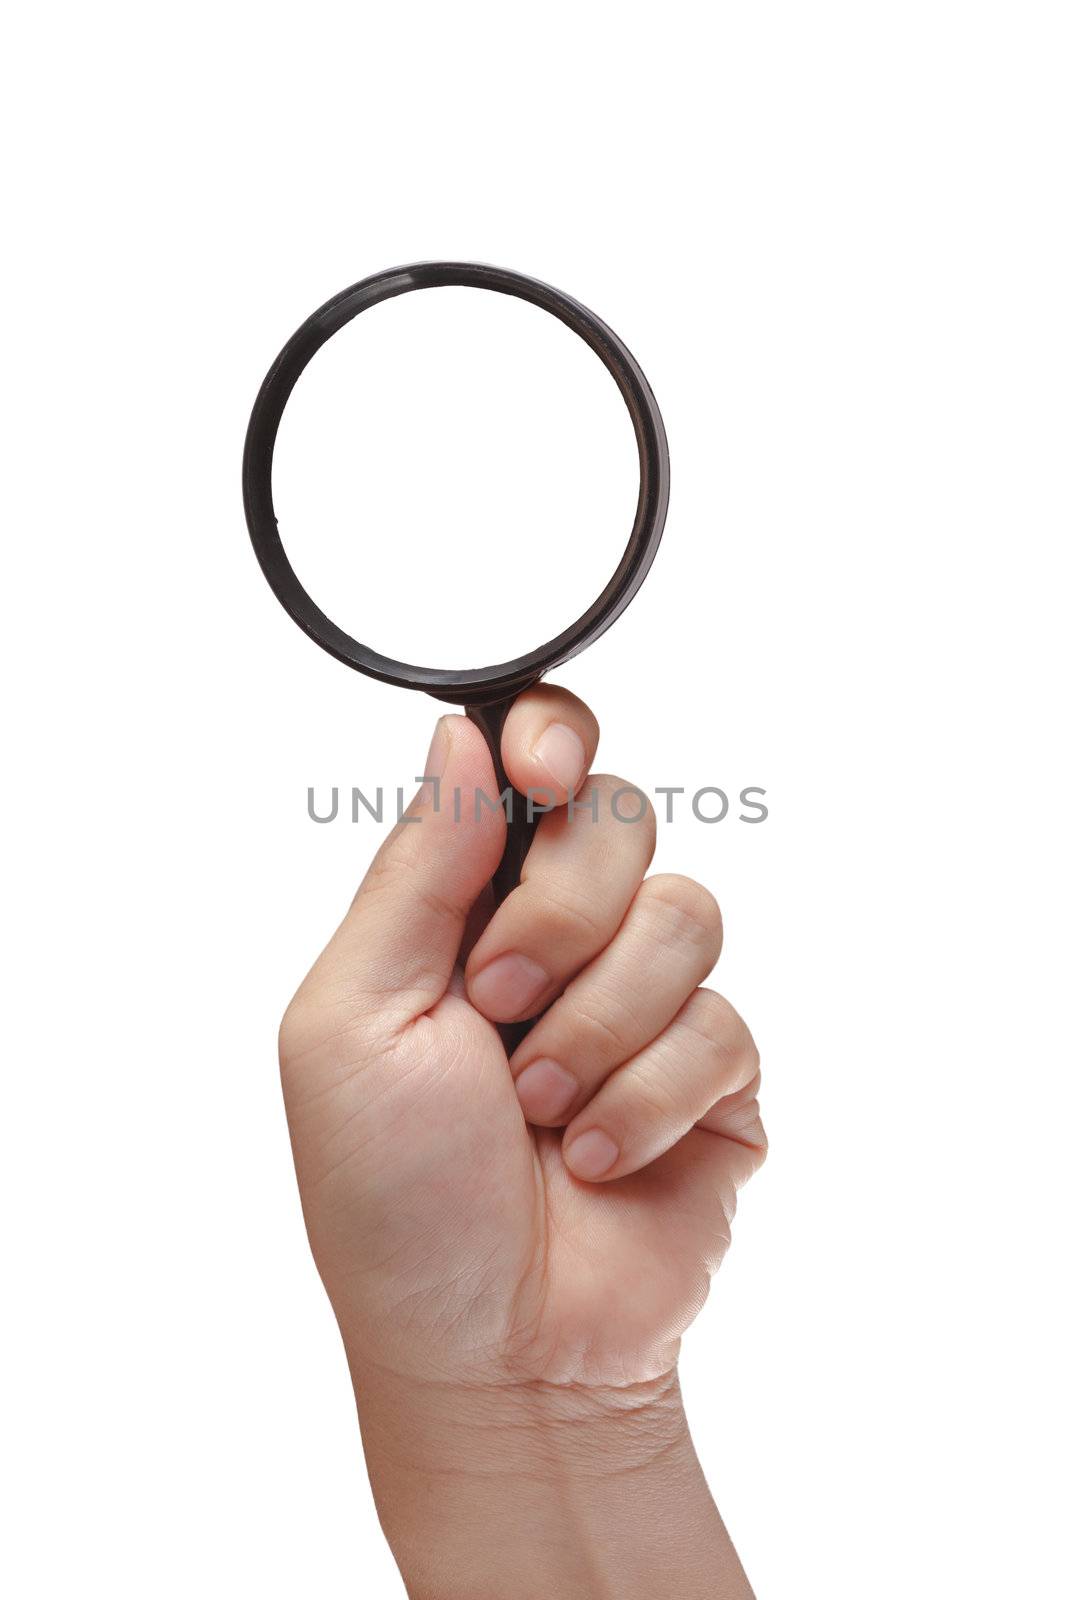 Magnifying glass in hand isolated by buchachon